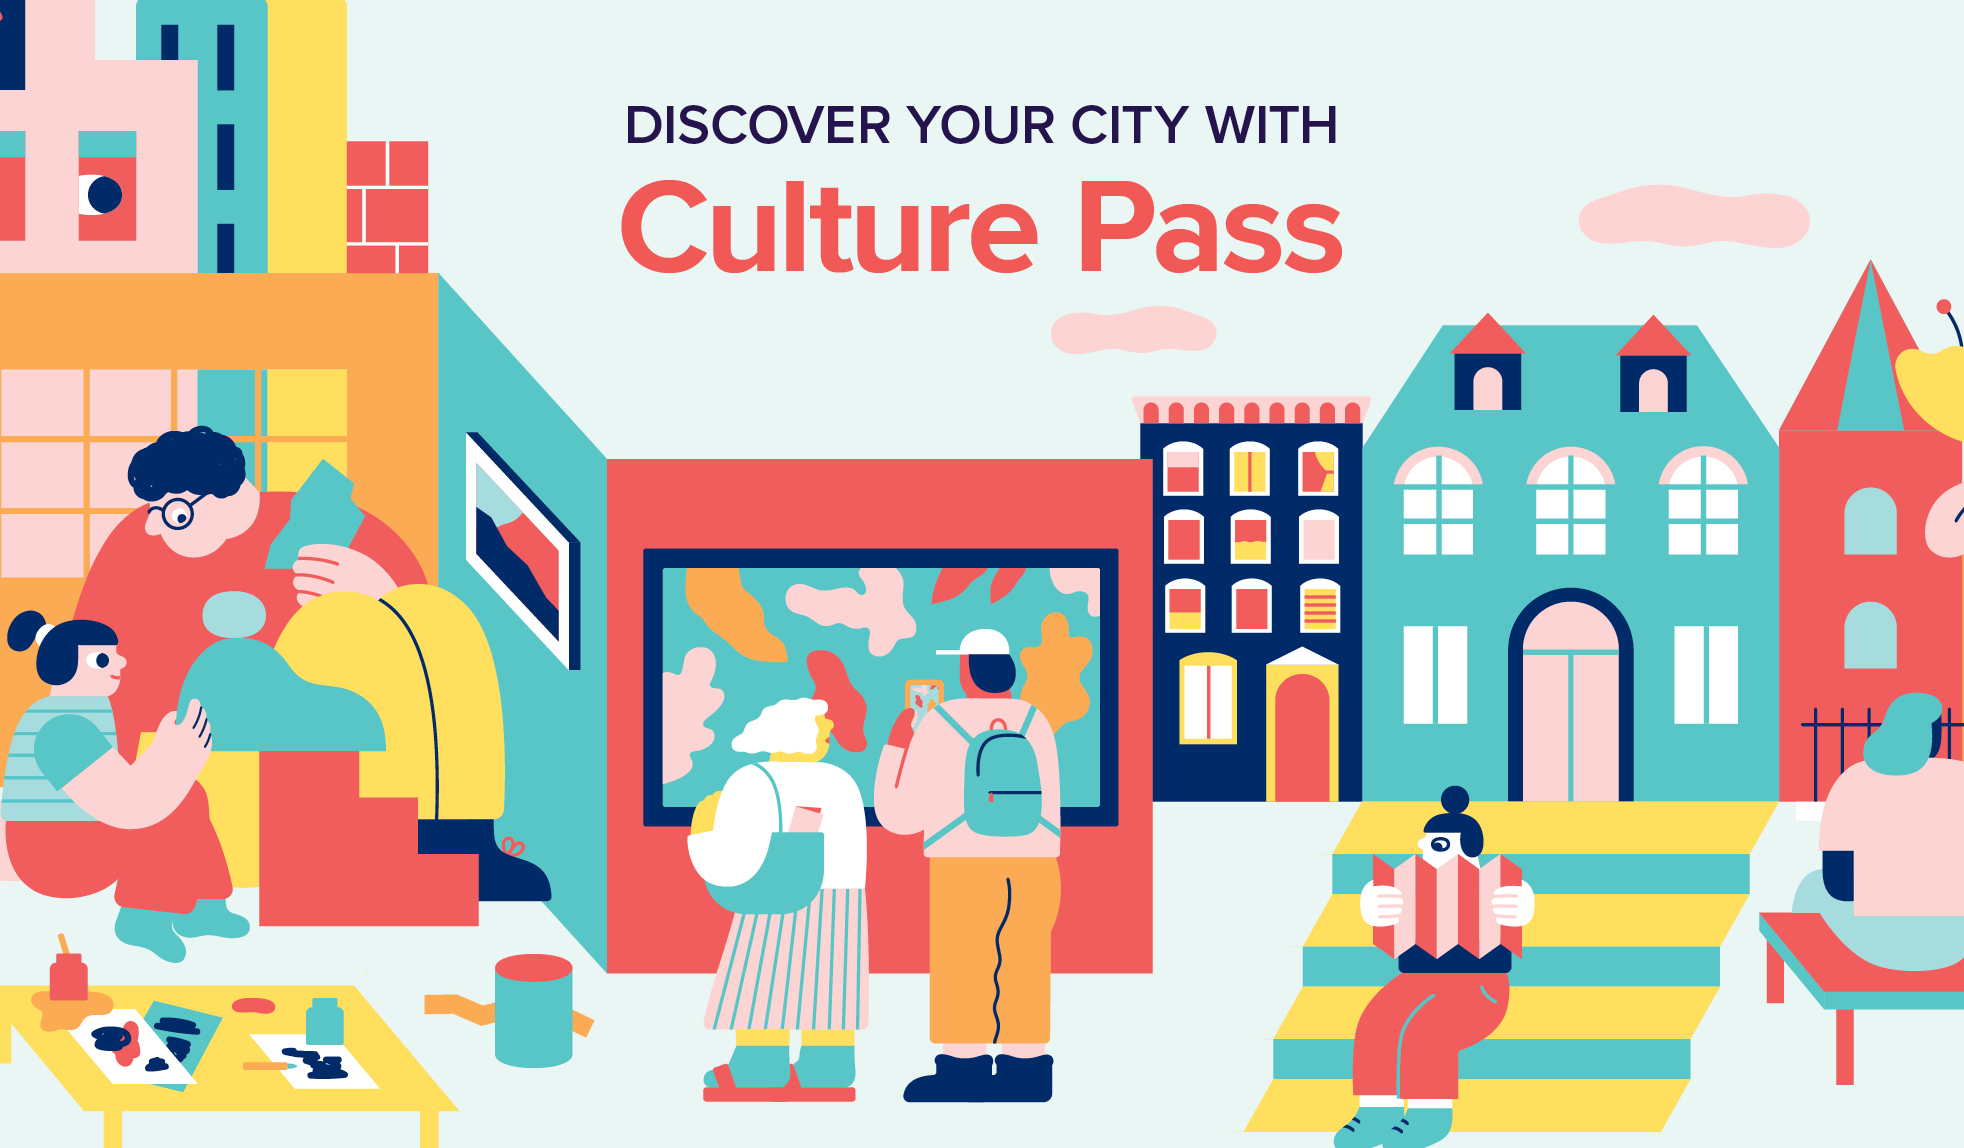 Use your library card to get your FREE passes to museums, theaters, and more!